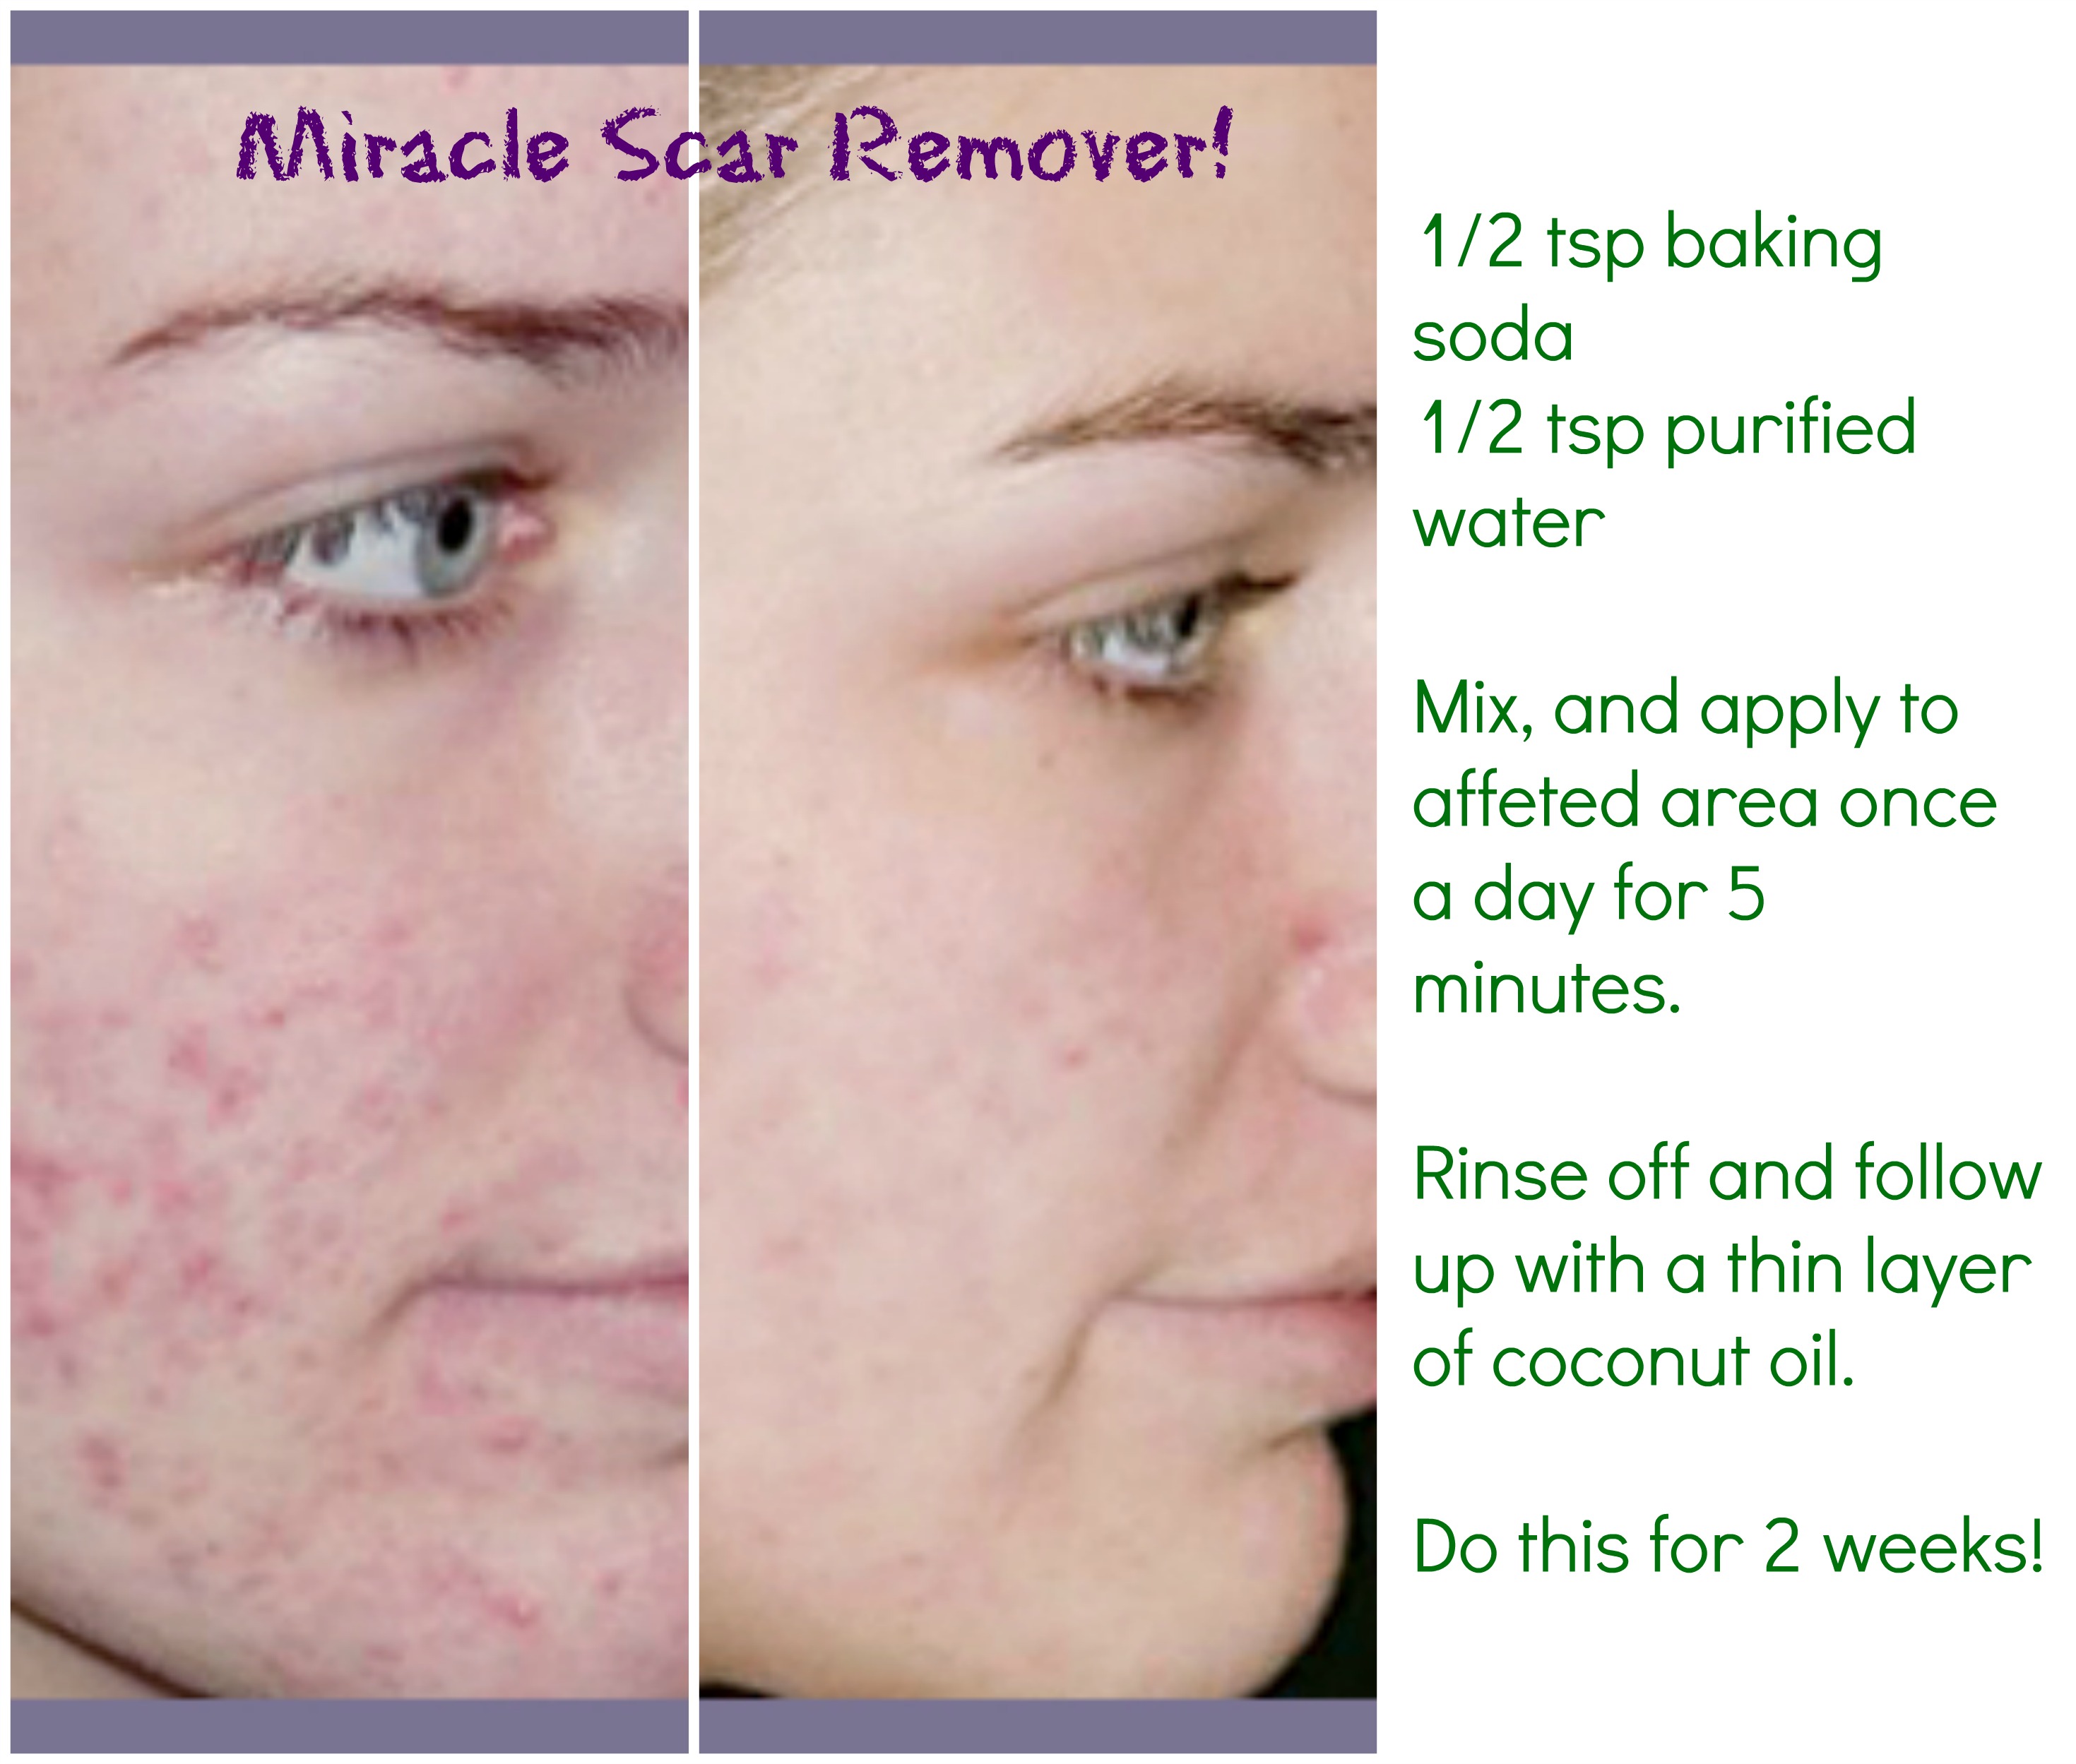 DIY Natural Scar Remover - Works WONDERS And It's Cheap!